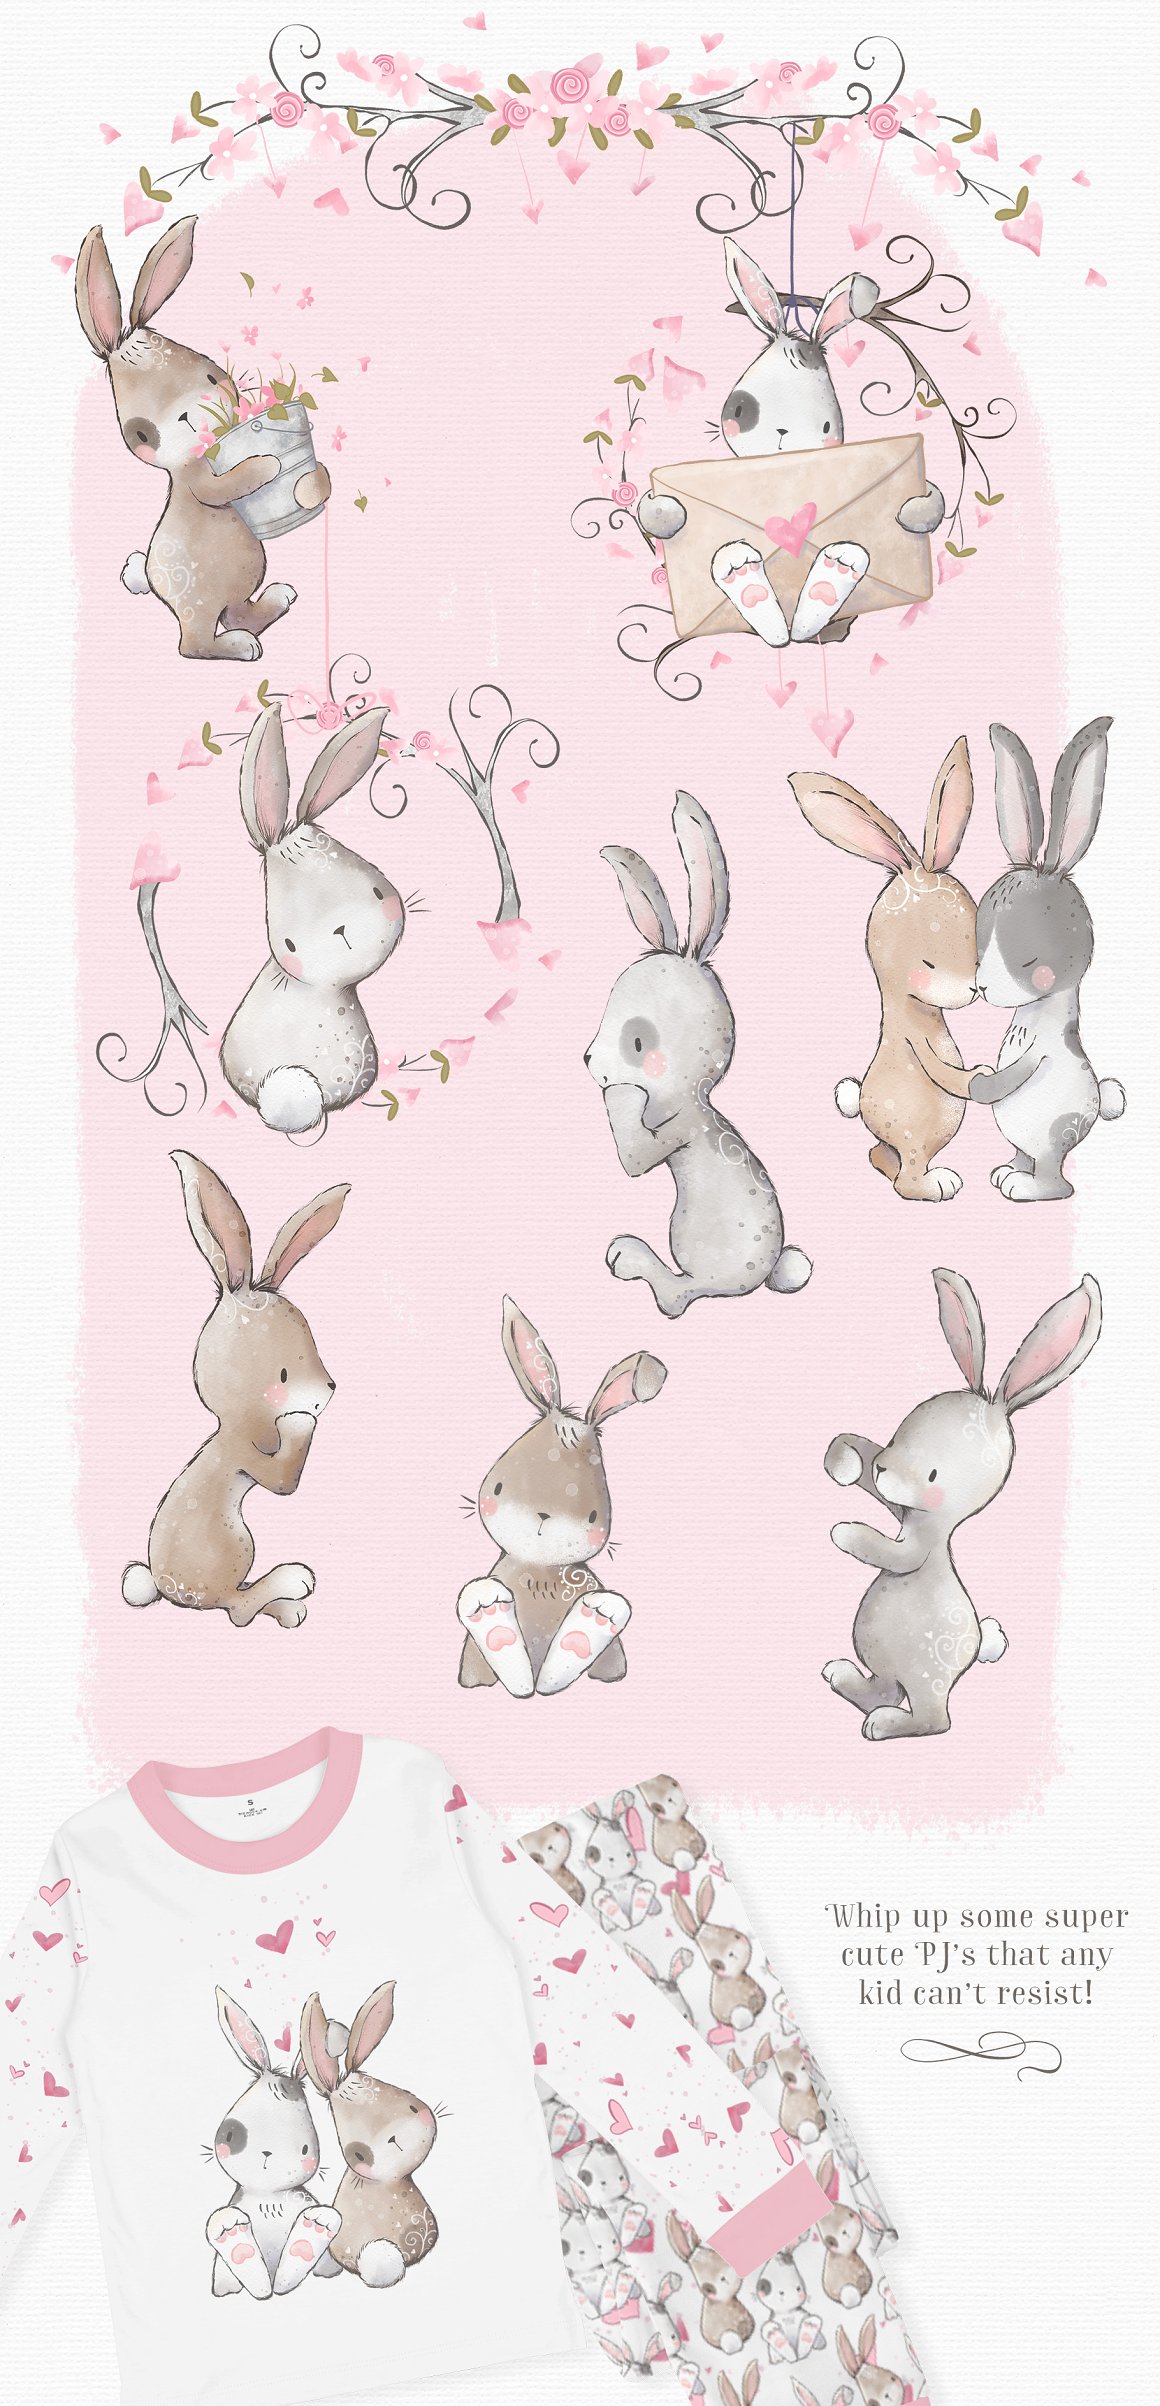 A set of 8 different illustrations of a bunny on a pink background.